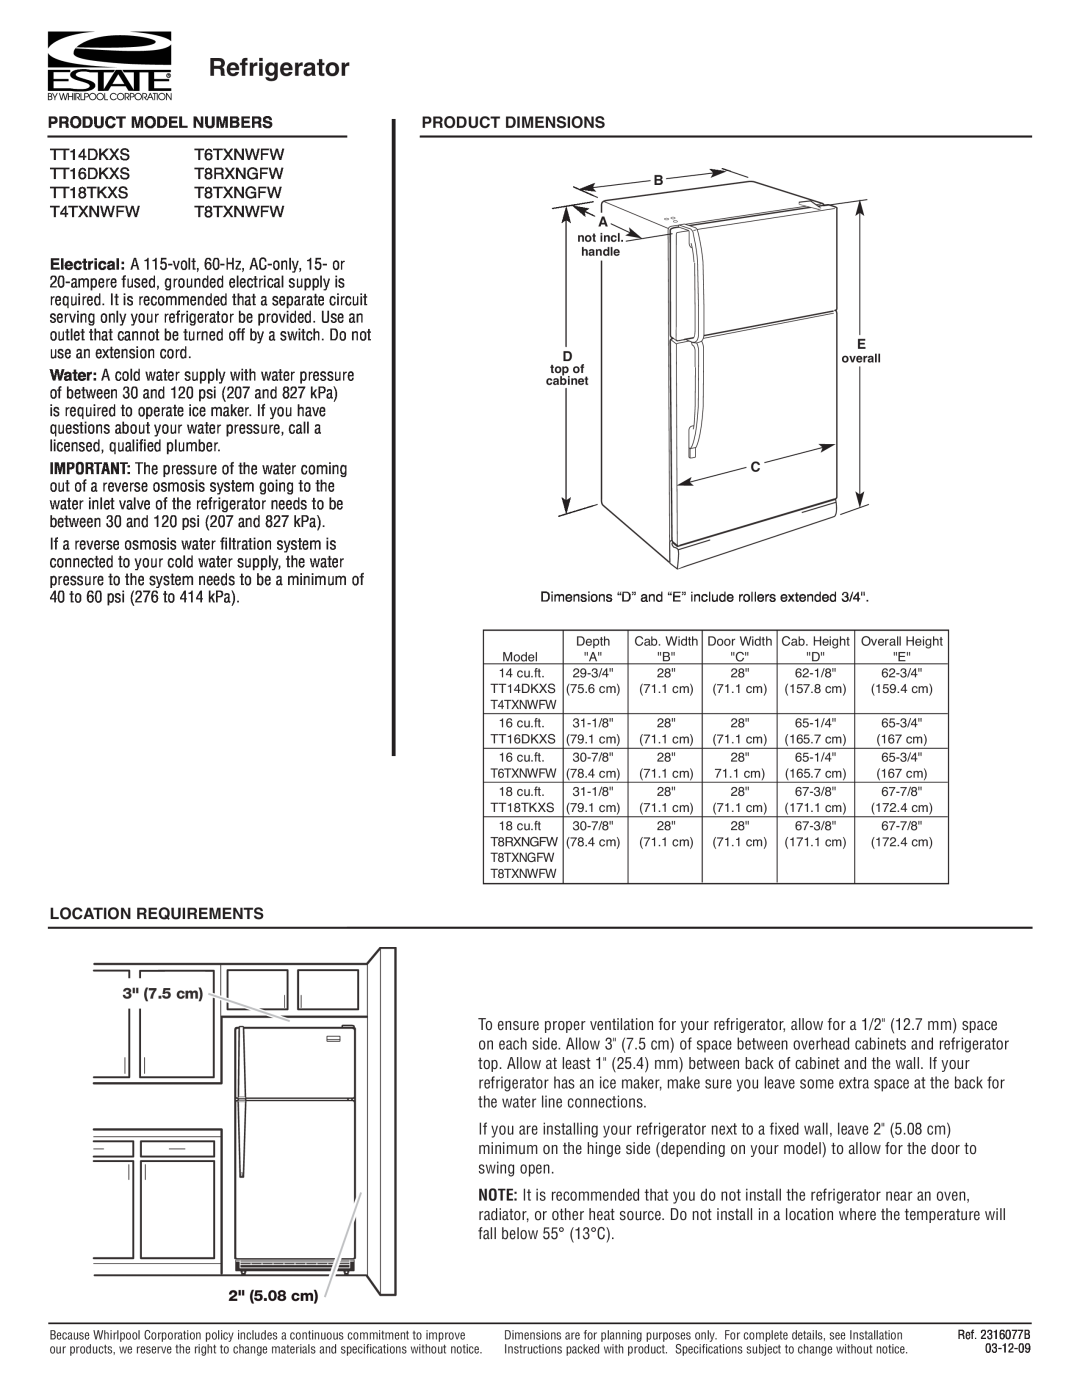 Estate T8TXNGFW dimensions Refrigerator, Product Model Numbers, Product Dimensions, LOCATION REQUIREMENTS 3 7.5 cm 